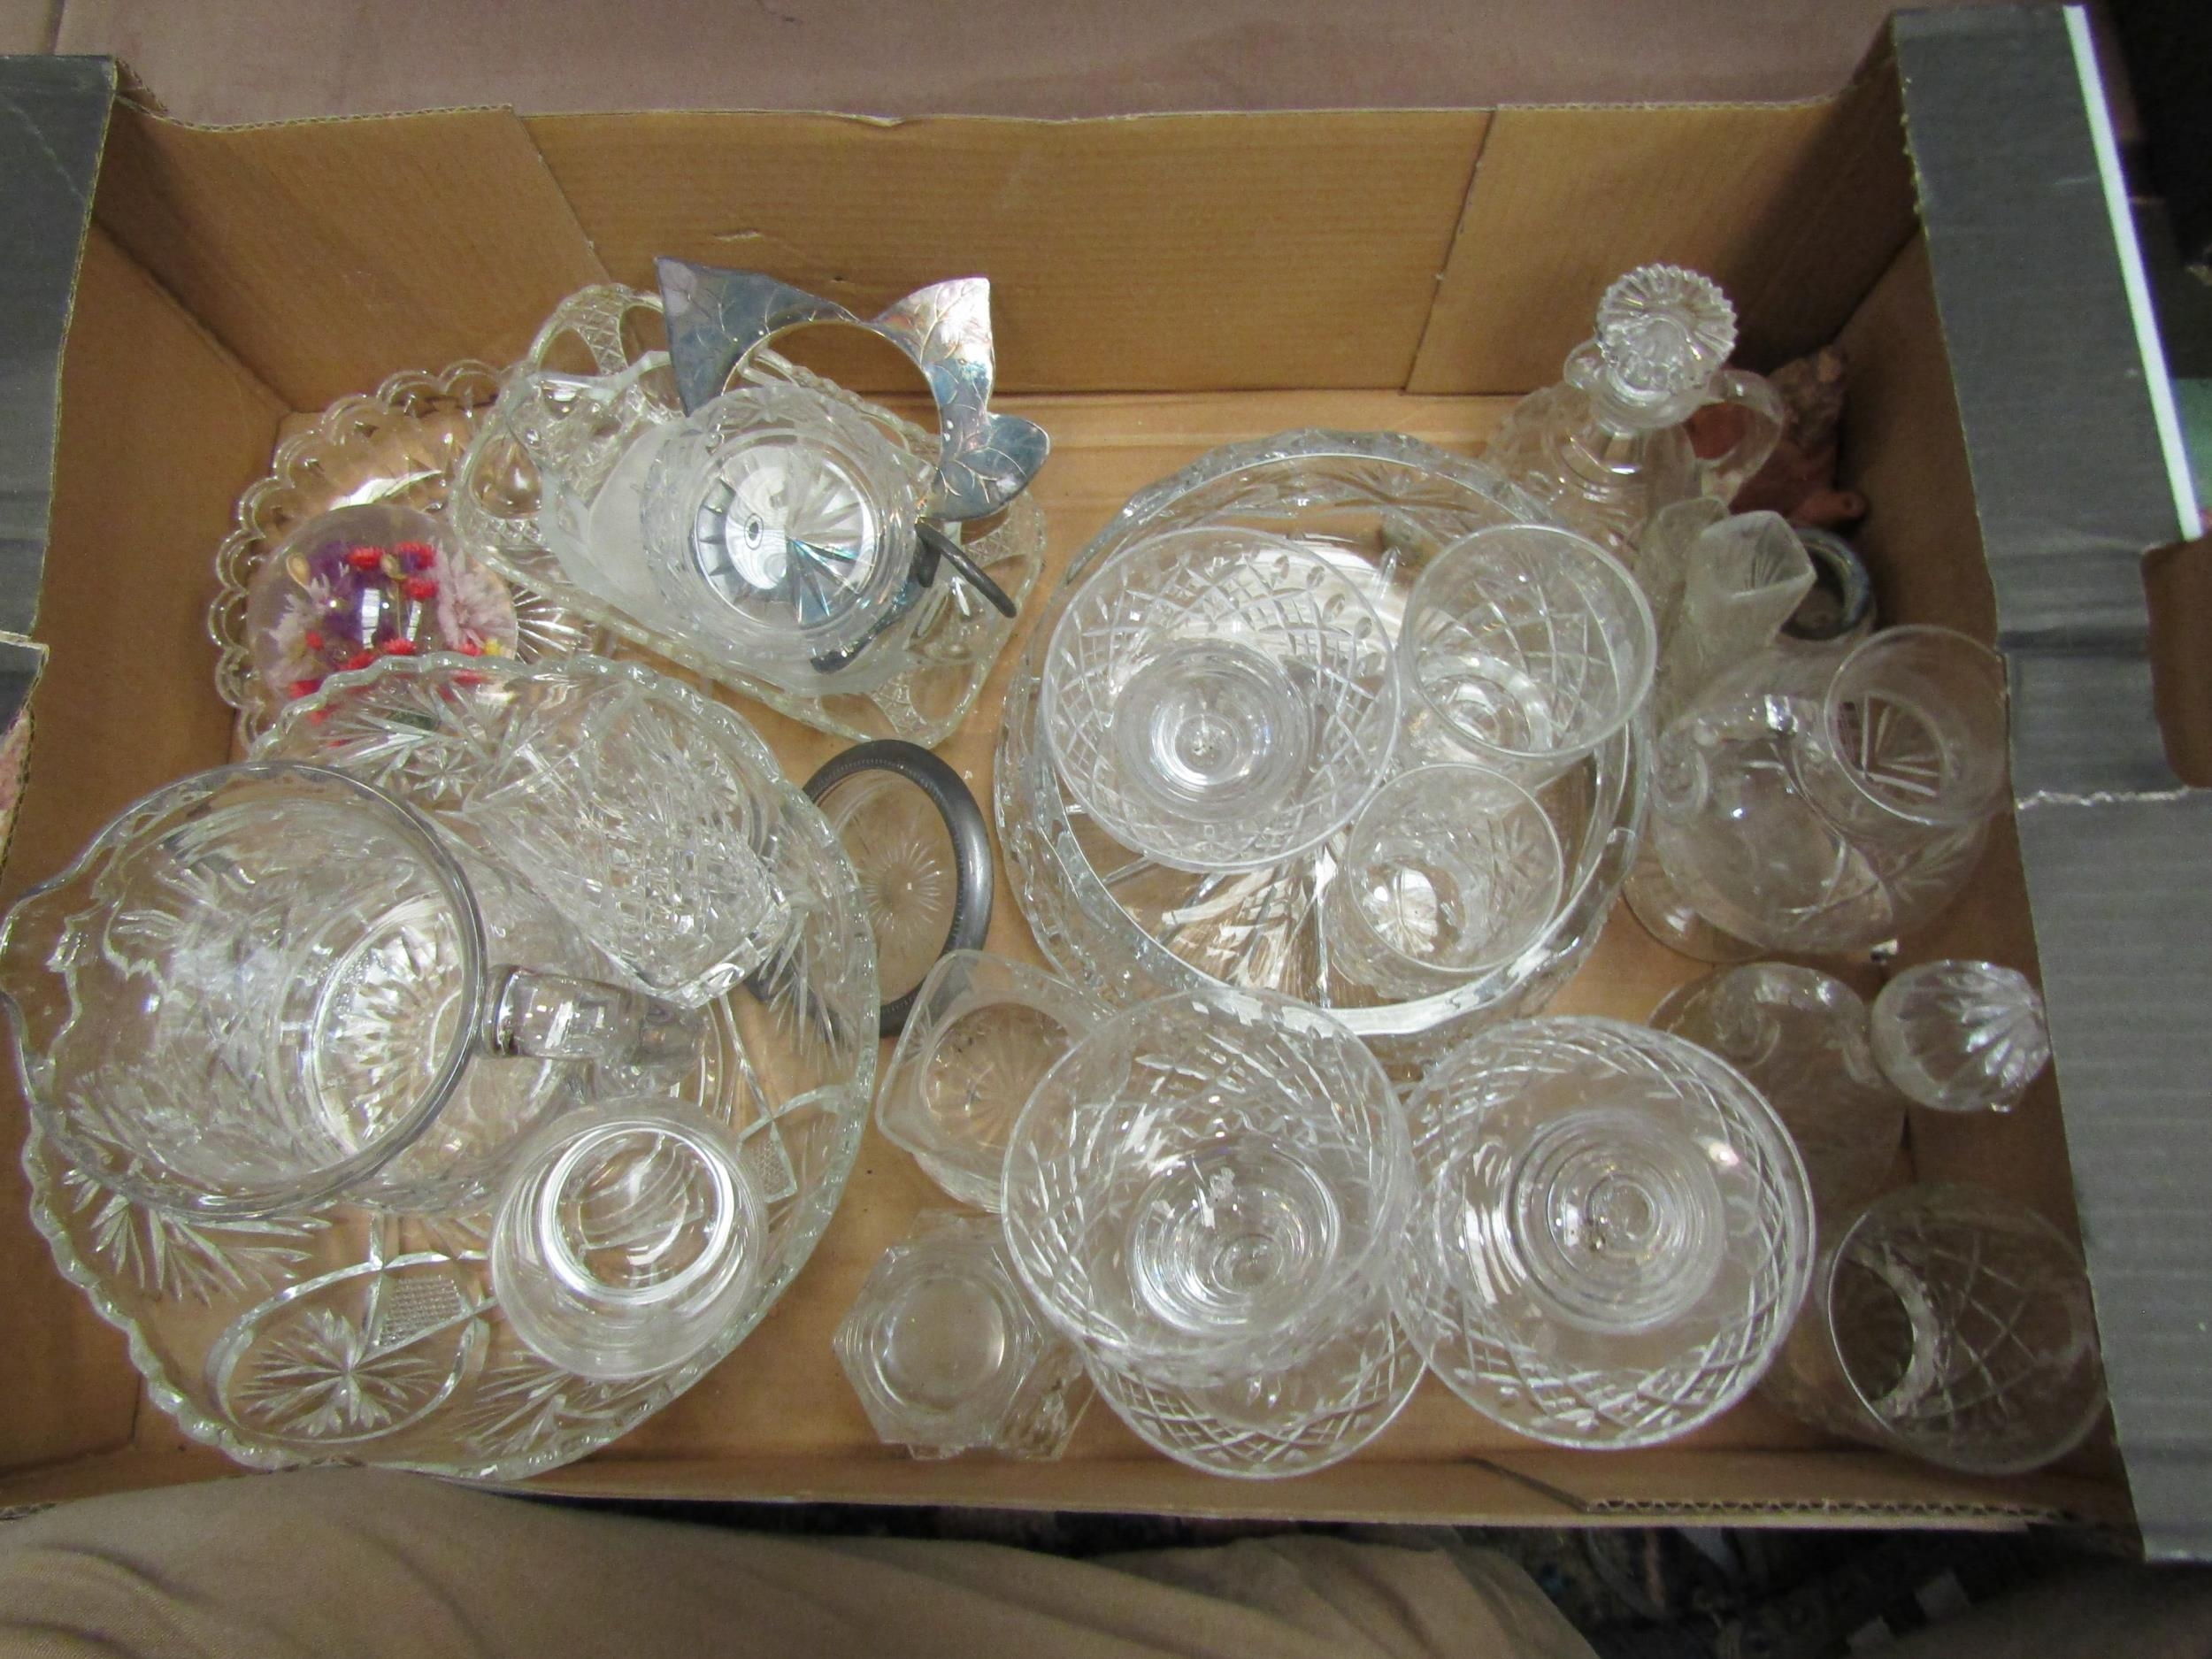 A box of glassware including jugs, bowls and sundae dishes